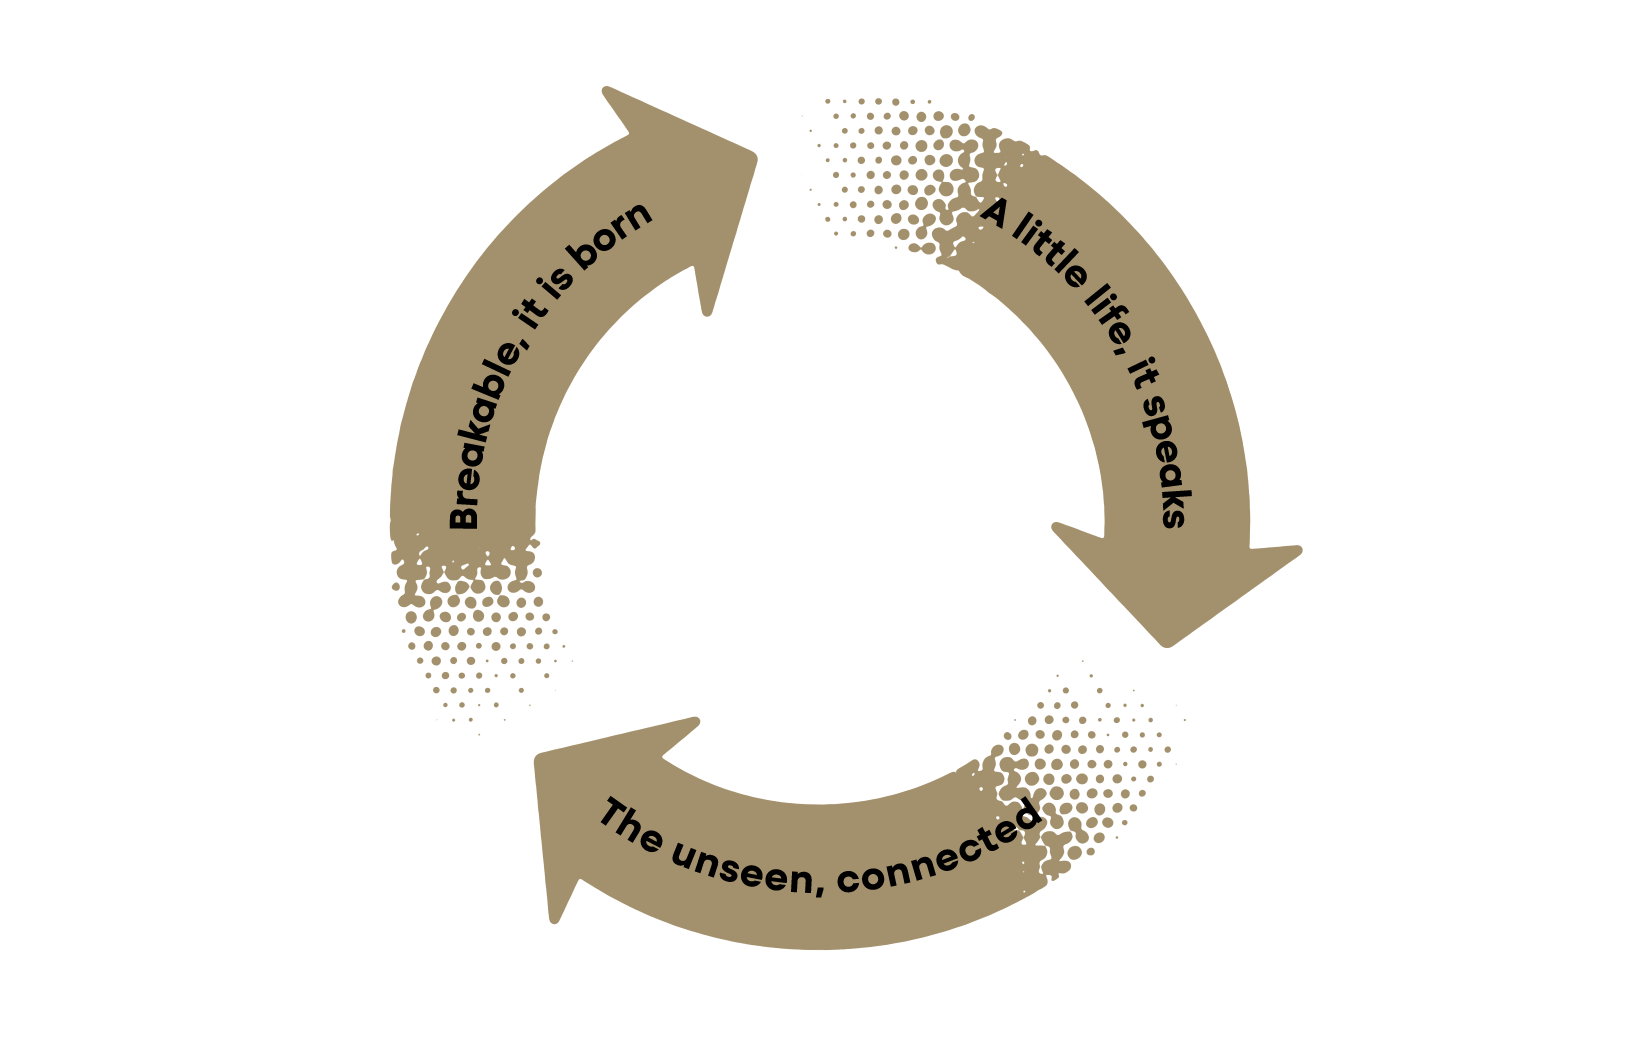 A diagram showing three elements in a circular loop: “Breakable, it is born,” “A little life, it speaks,” and “The unseen, connected”